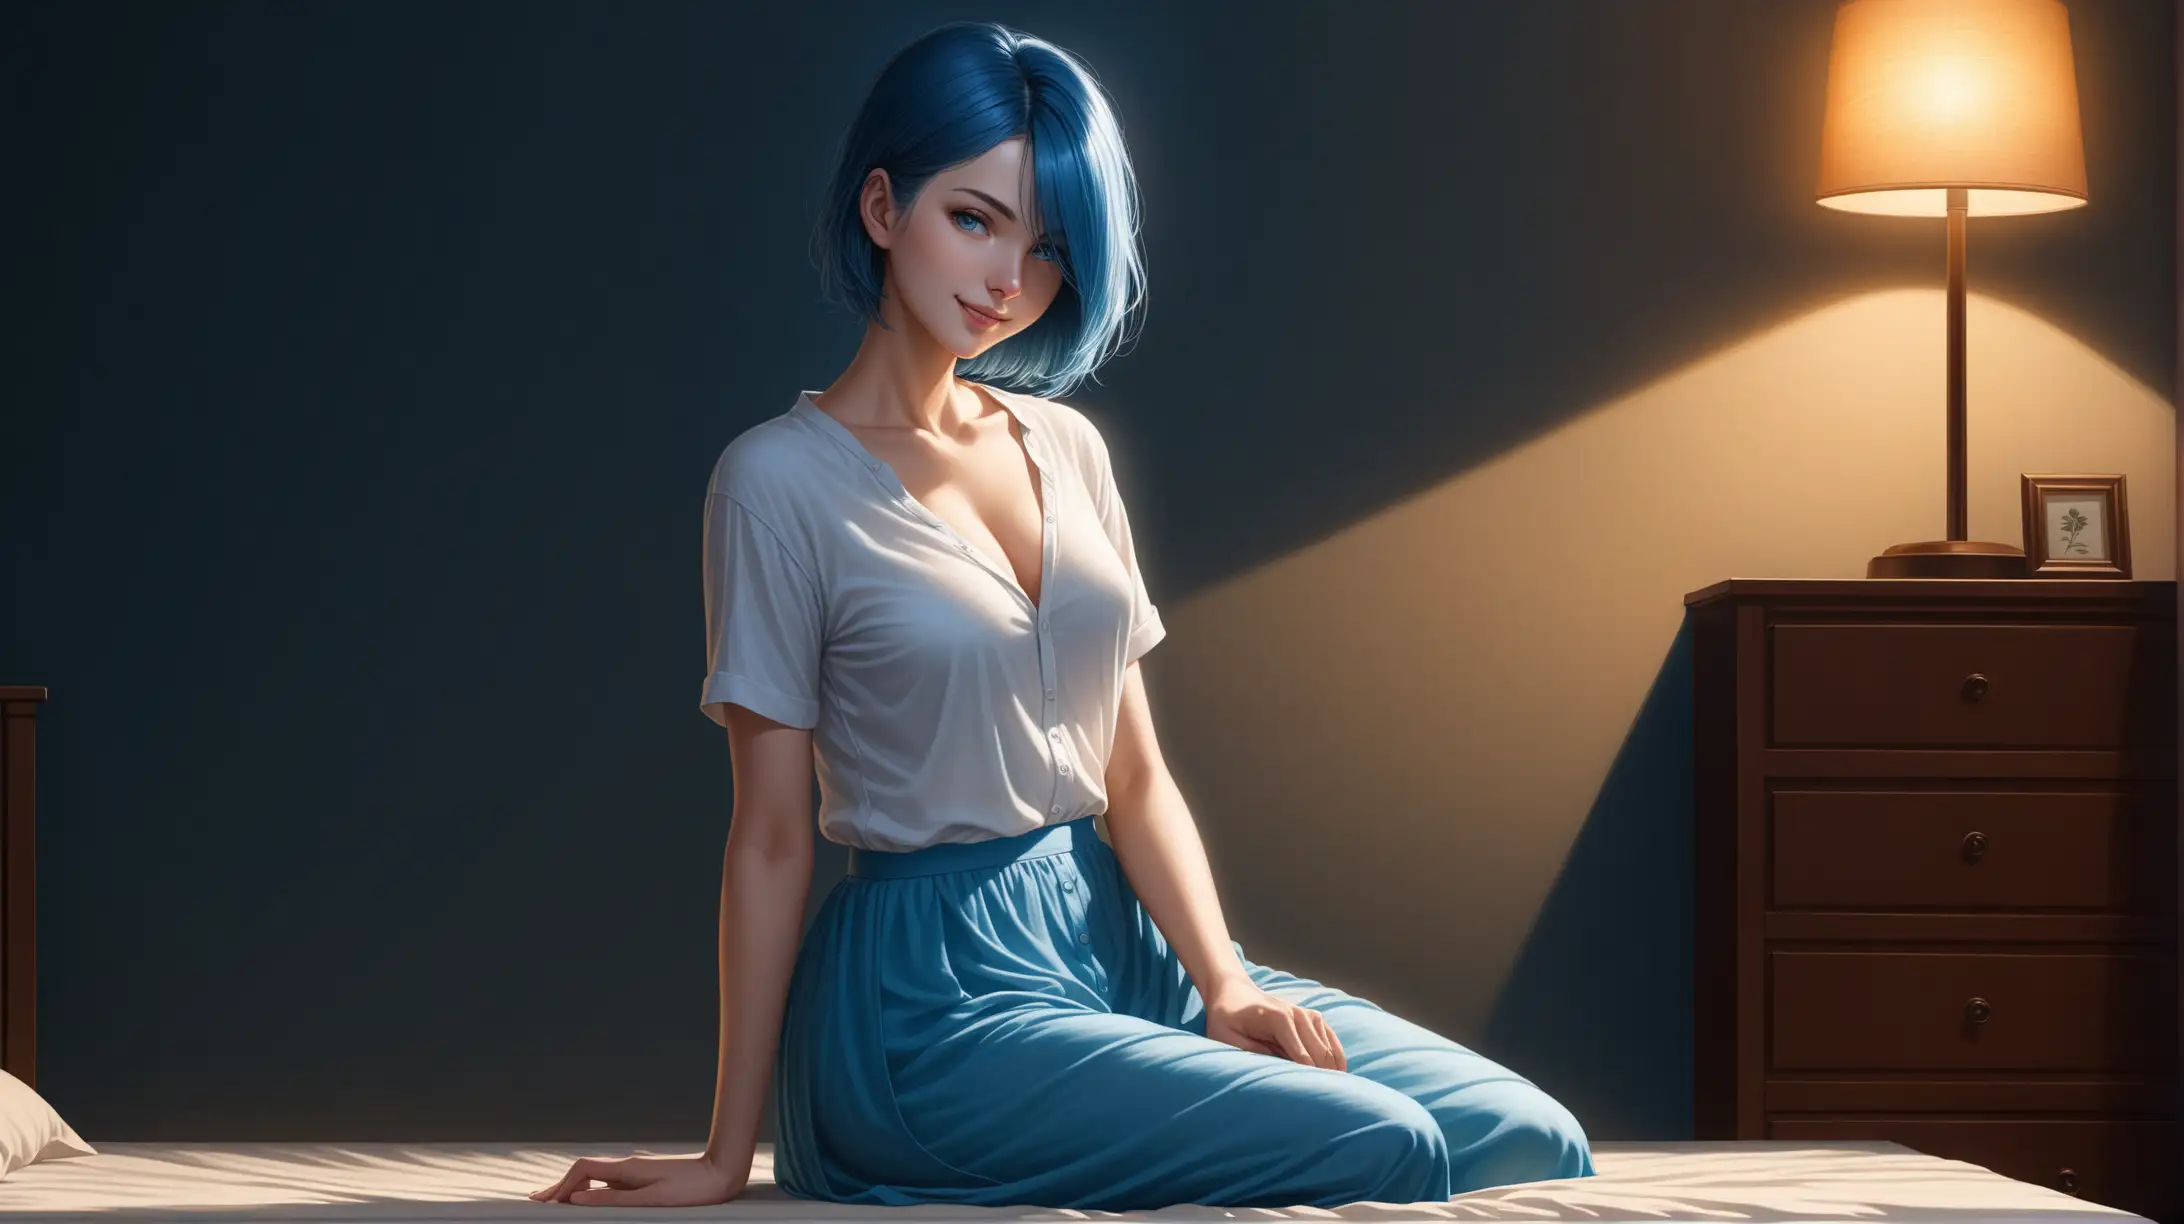 Seductive Woman with Blue Hair and Summer Attire in Nighttime Setting